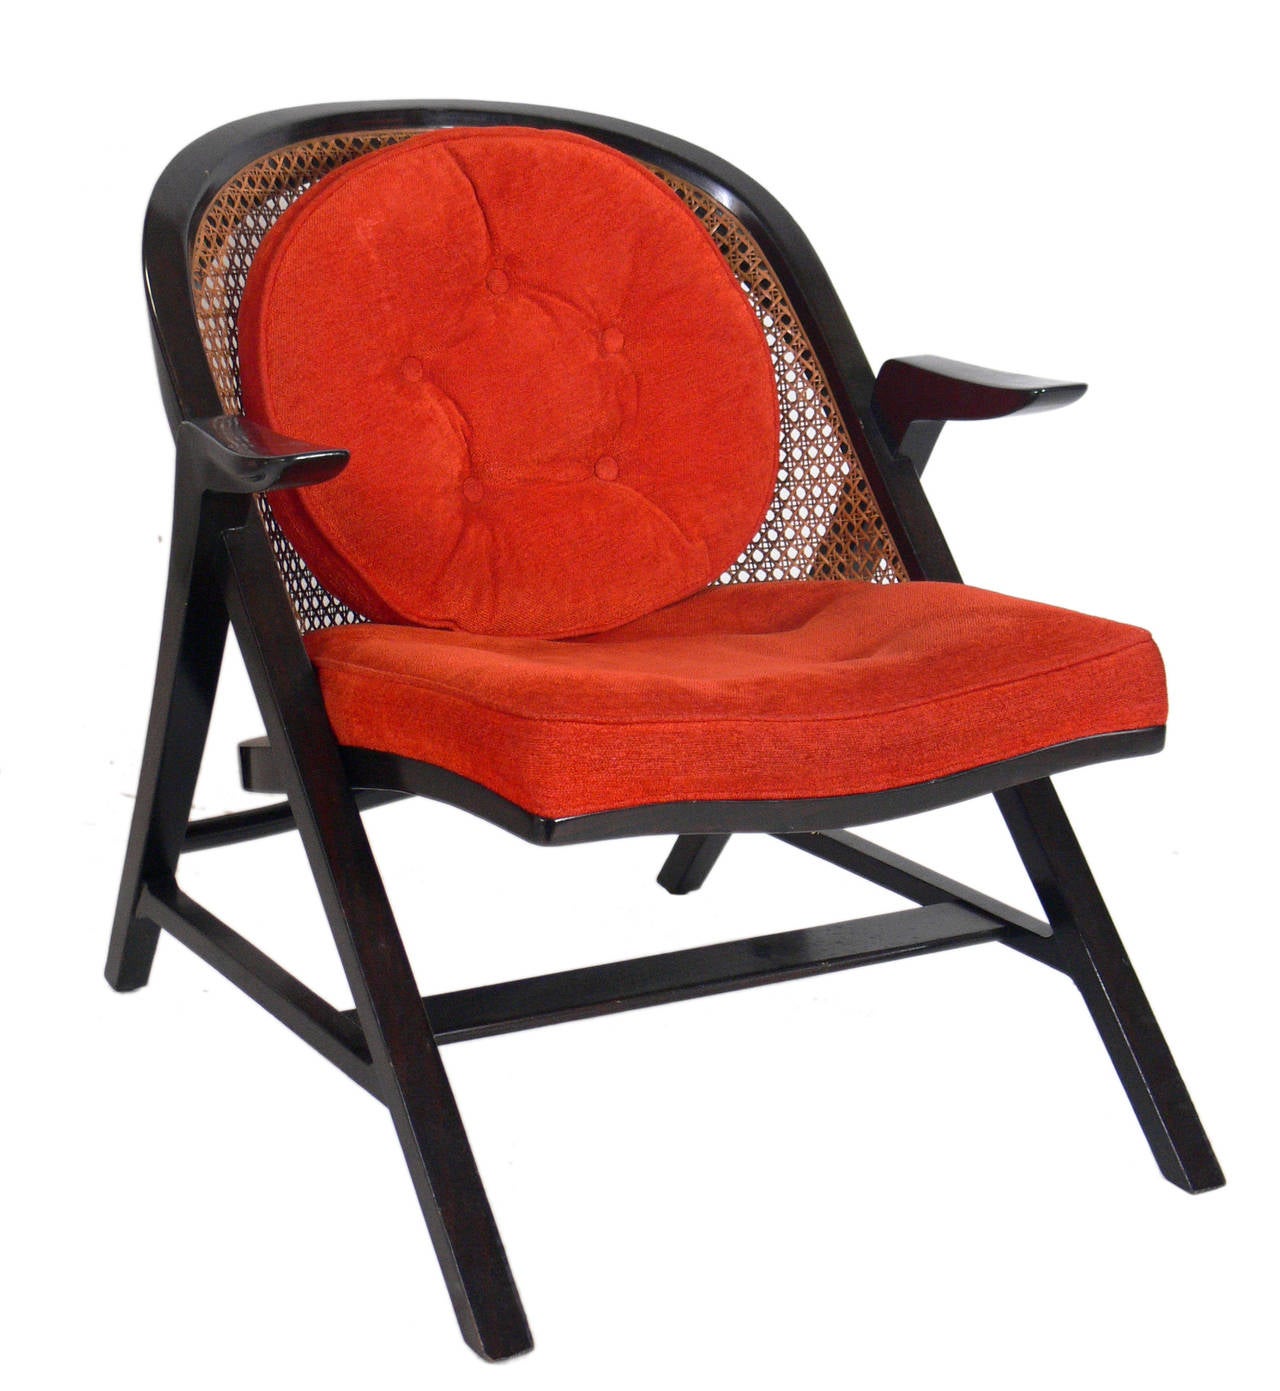 Curvaceous lounge chairs designed by Edward Wormley for Dunbar, circa 1950s. These chairs are currently being refinished and reupholstered and can be refinished in your choice of color and reupholstered in your fabric. The price noted below includes